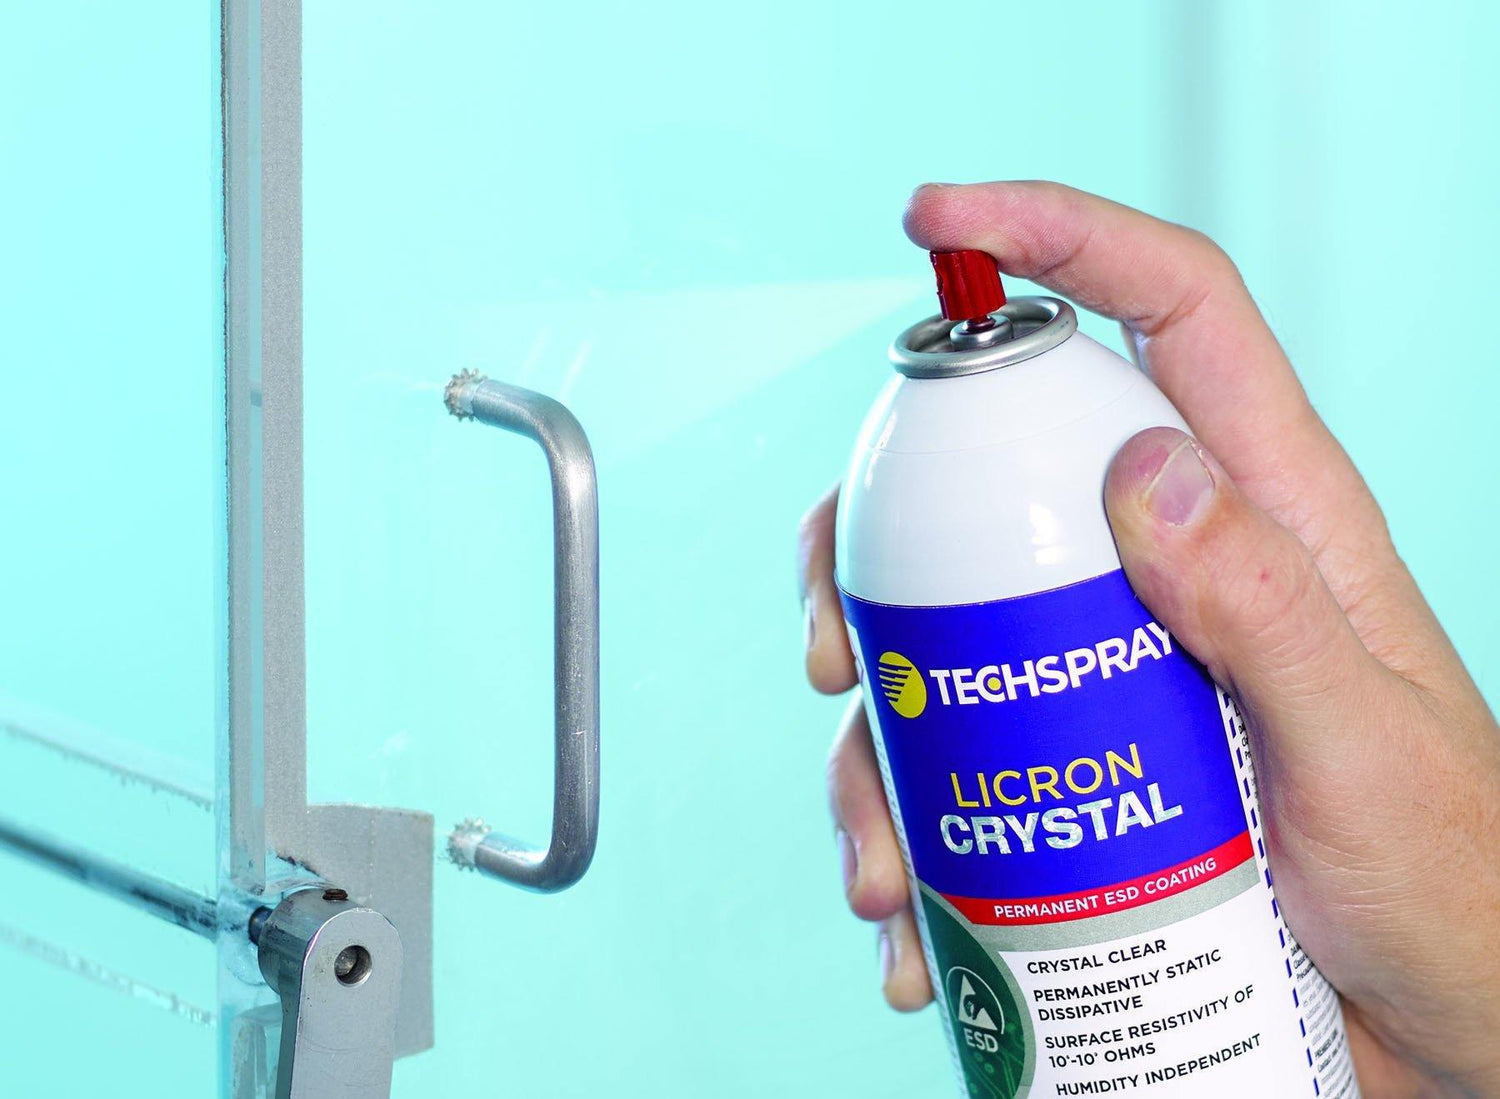 Techspray Licron Crystal ESD-Safe Coating 1756-8S 8 Oz / 226g Aerosol - coats various type of surface to be ESD safe